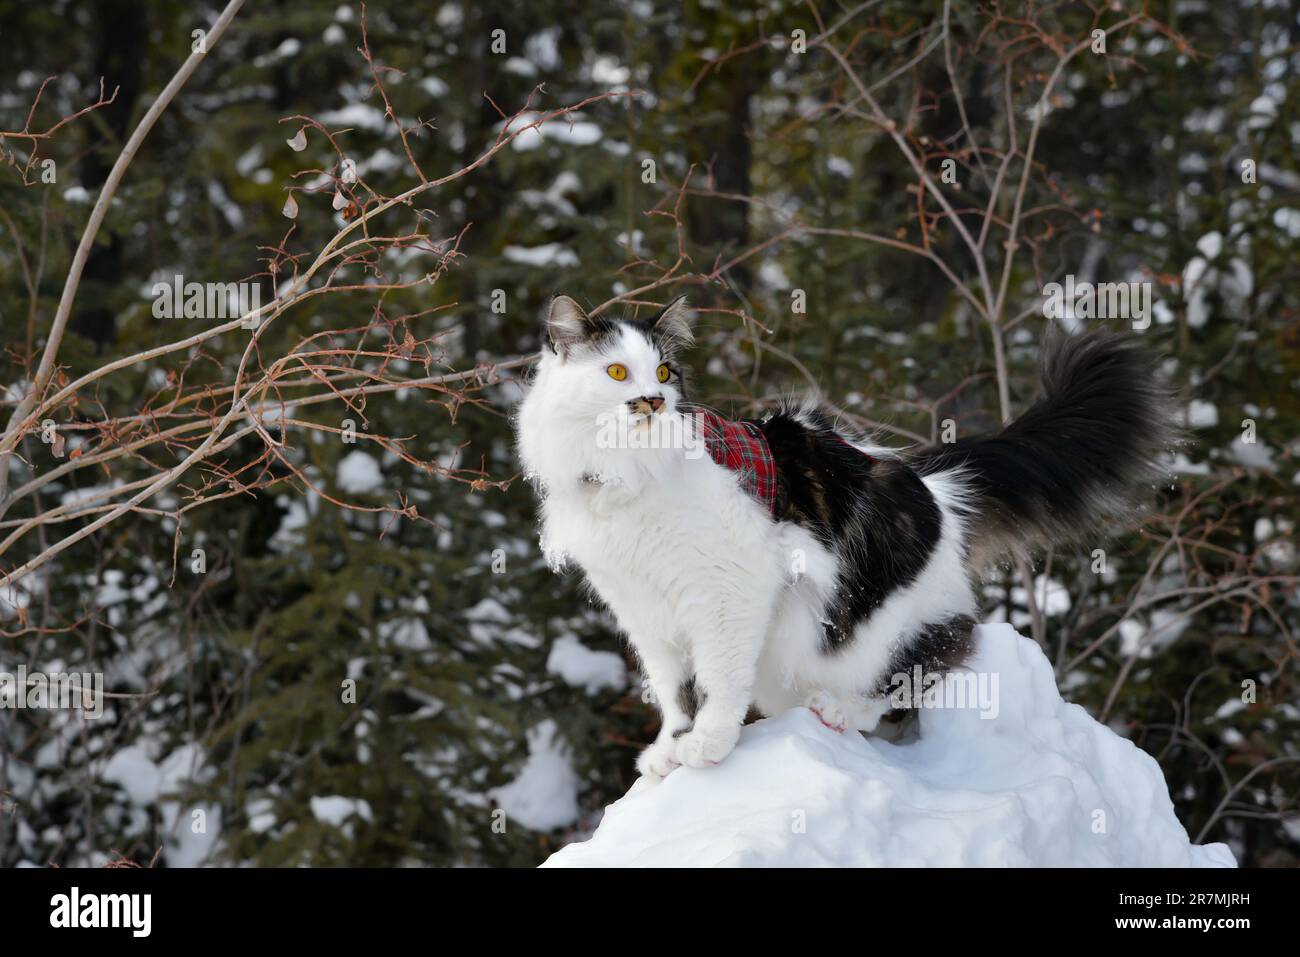 Elegant pet cat on a leash with a vest on in the winter snow. White & black cat with bright orange, intense eyes curious & exploring. Stock Photo